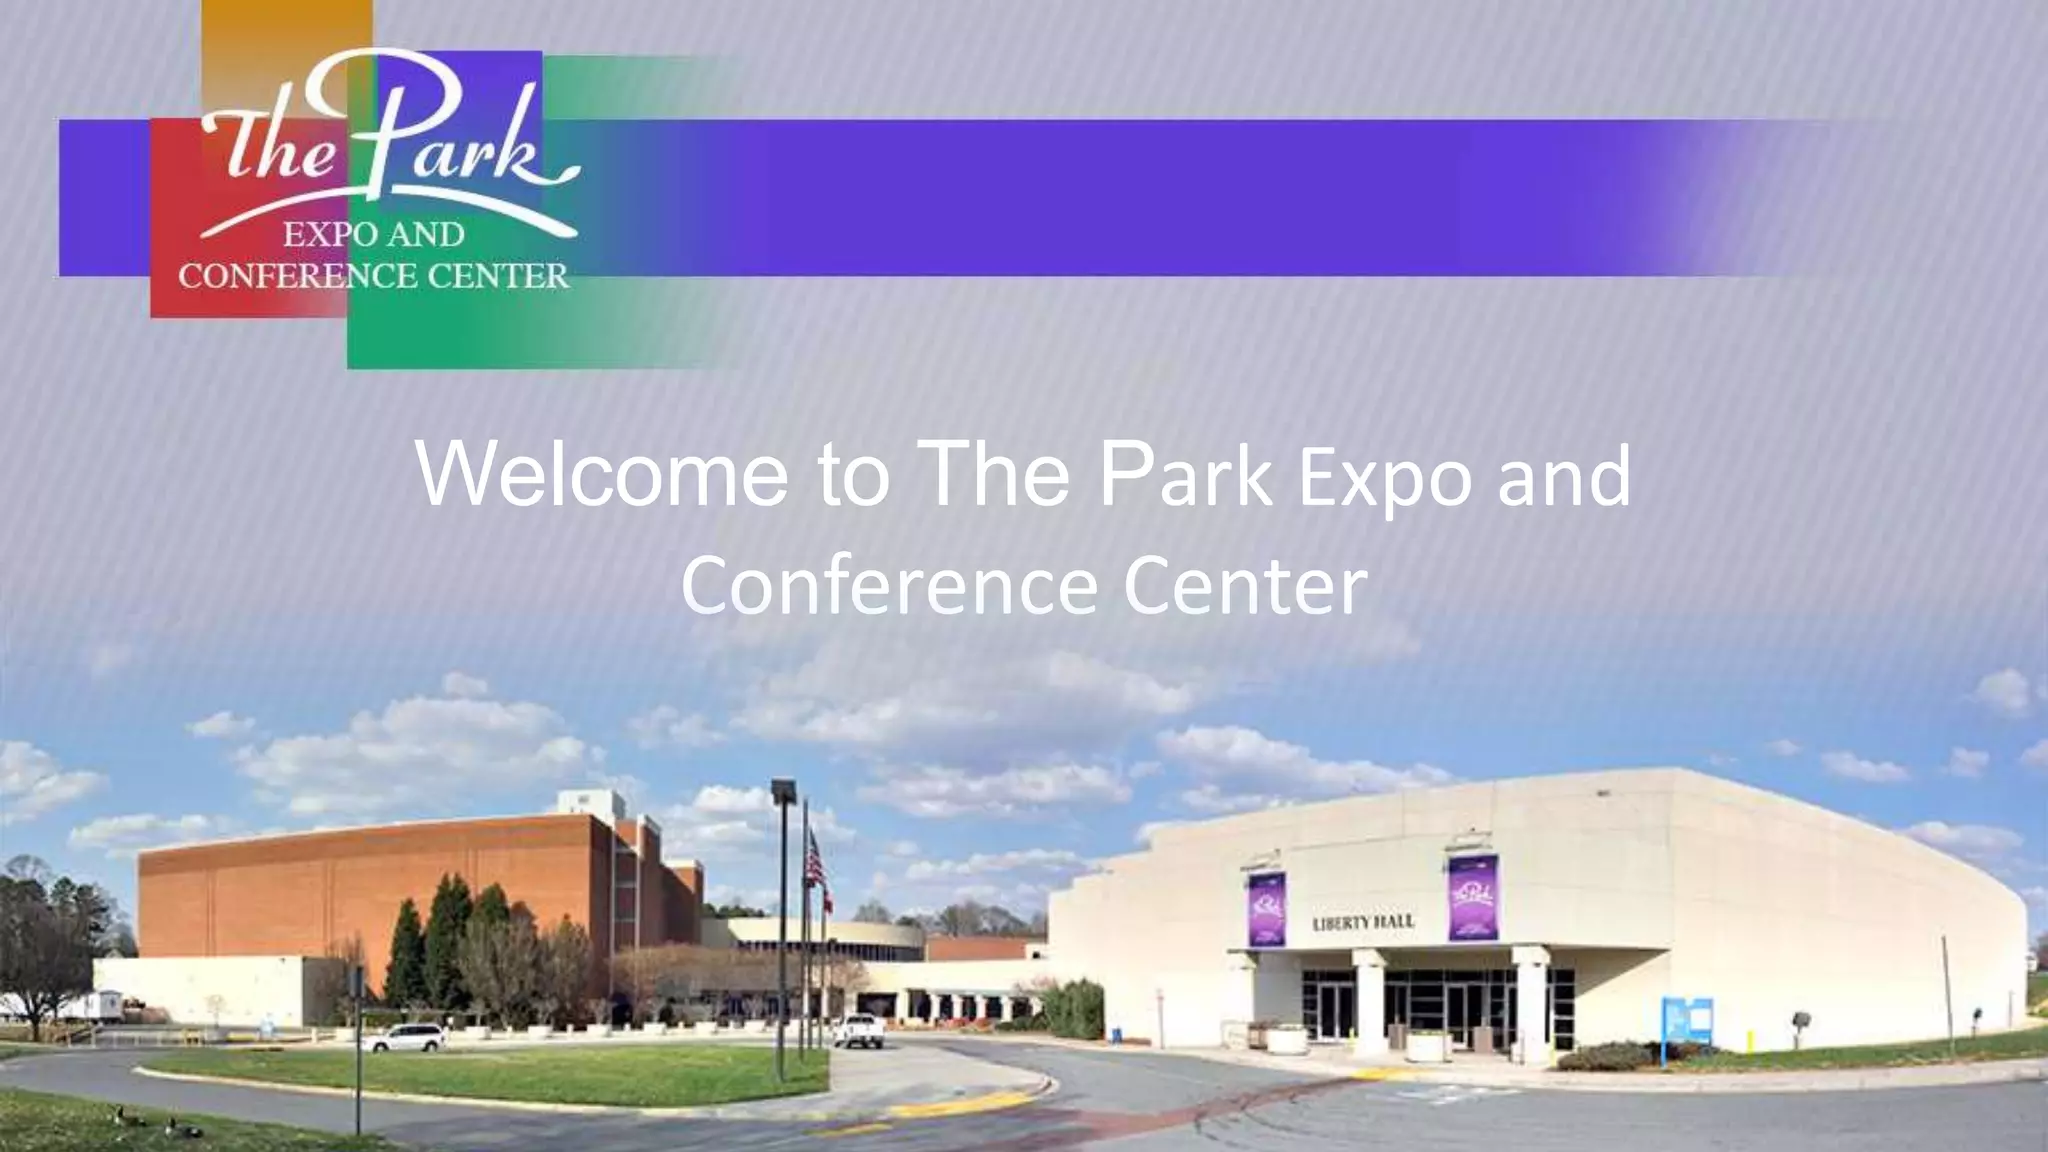 The Park Expo & Conference Center